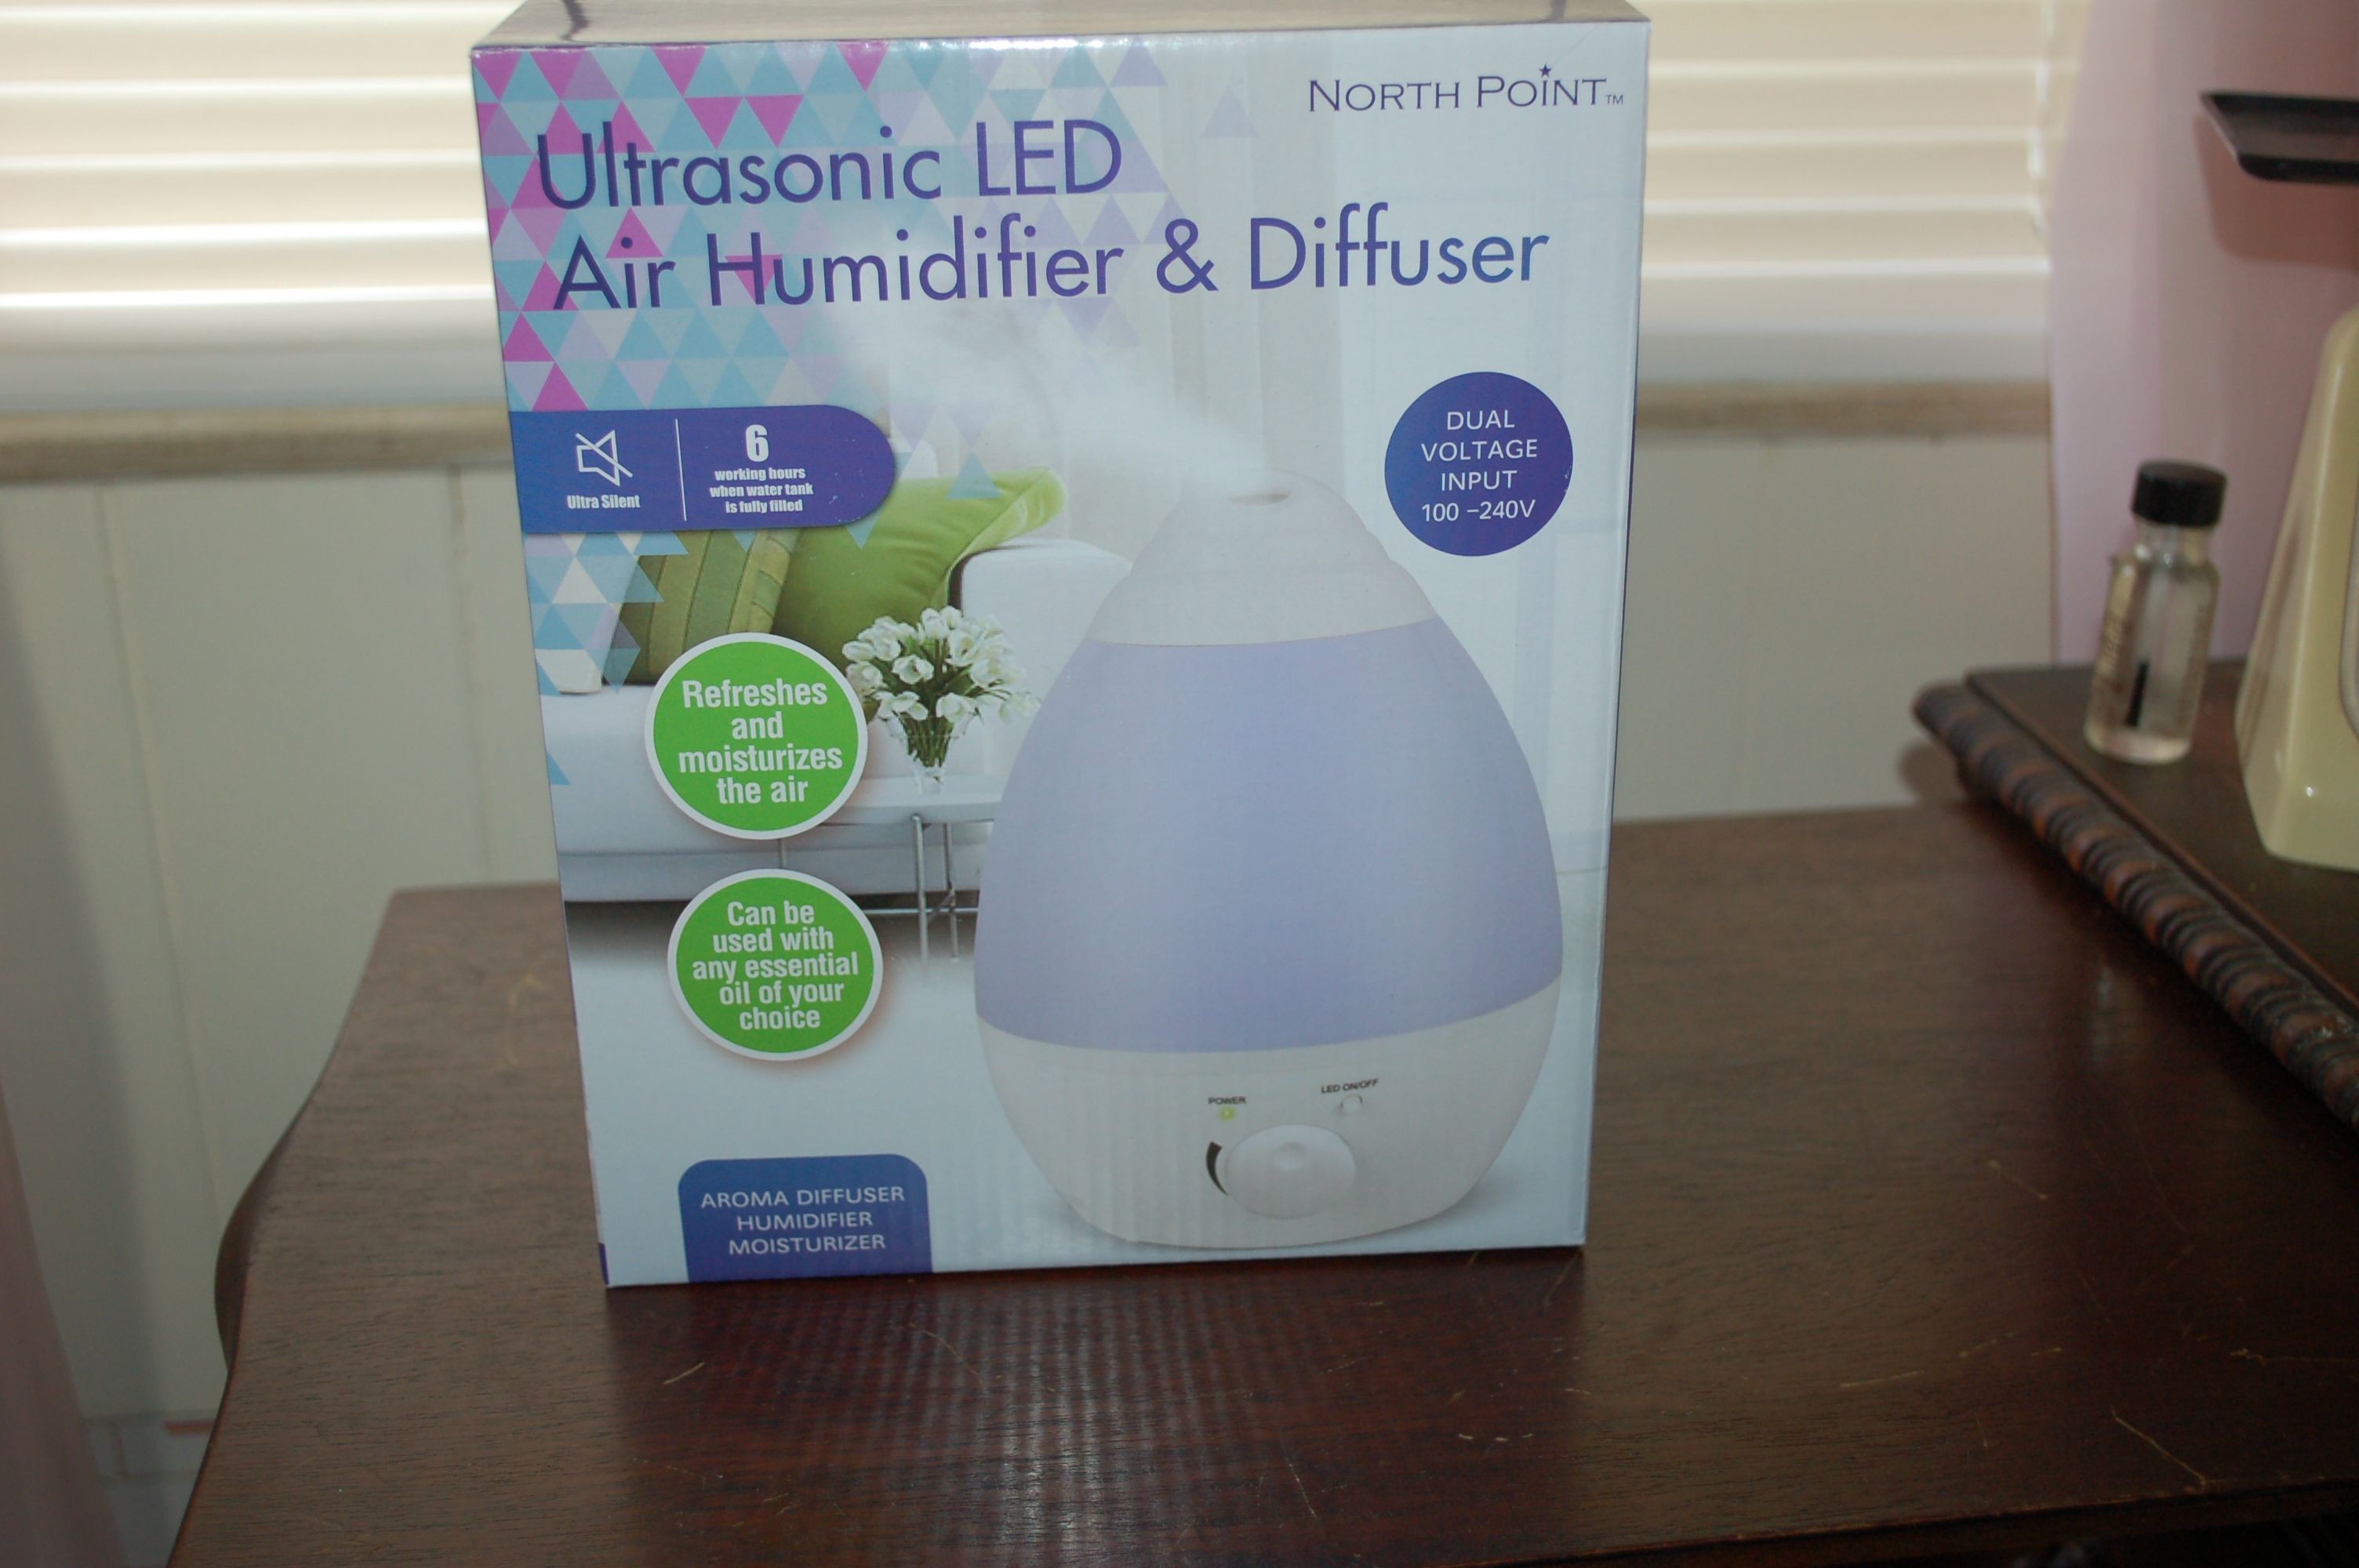 NEW , NORTH POINT ULTRASONIC LED AIR HUMIDIFIER & DIFFUSER